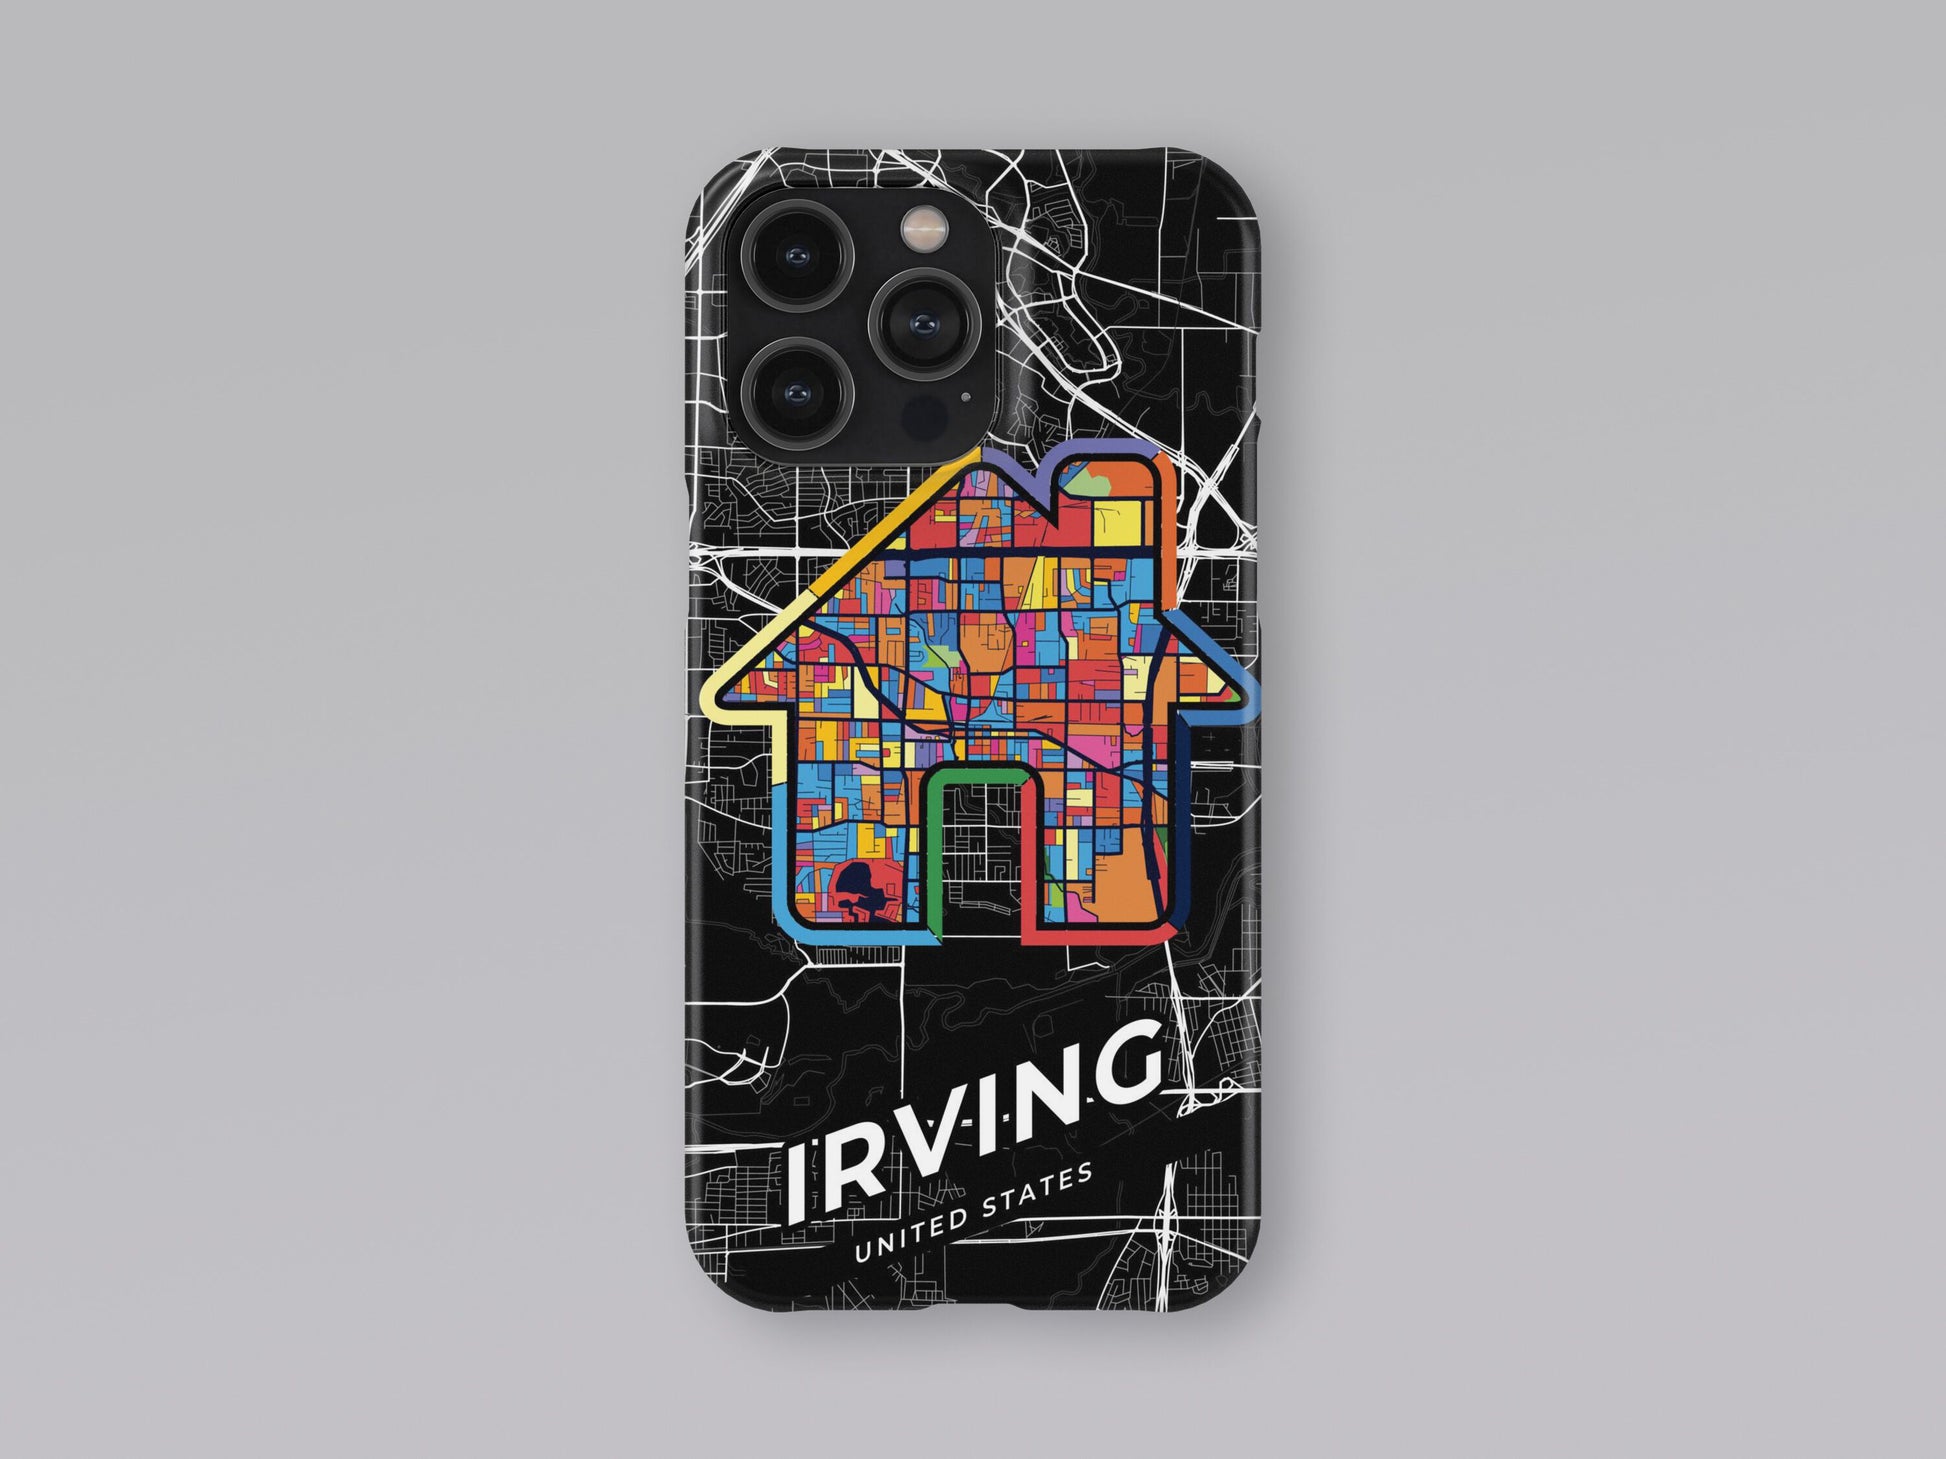 Irving Texas slim phone case with colorful icon. Birthday, wedding or housewarming gift. Couple match cases. 3